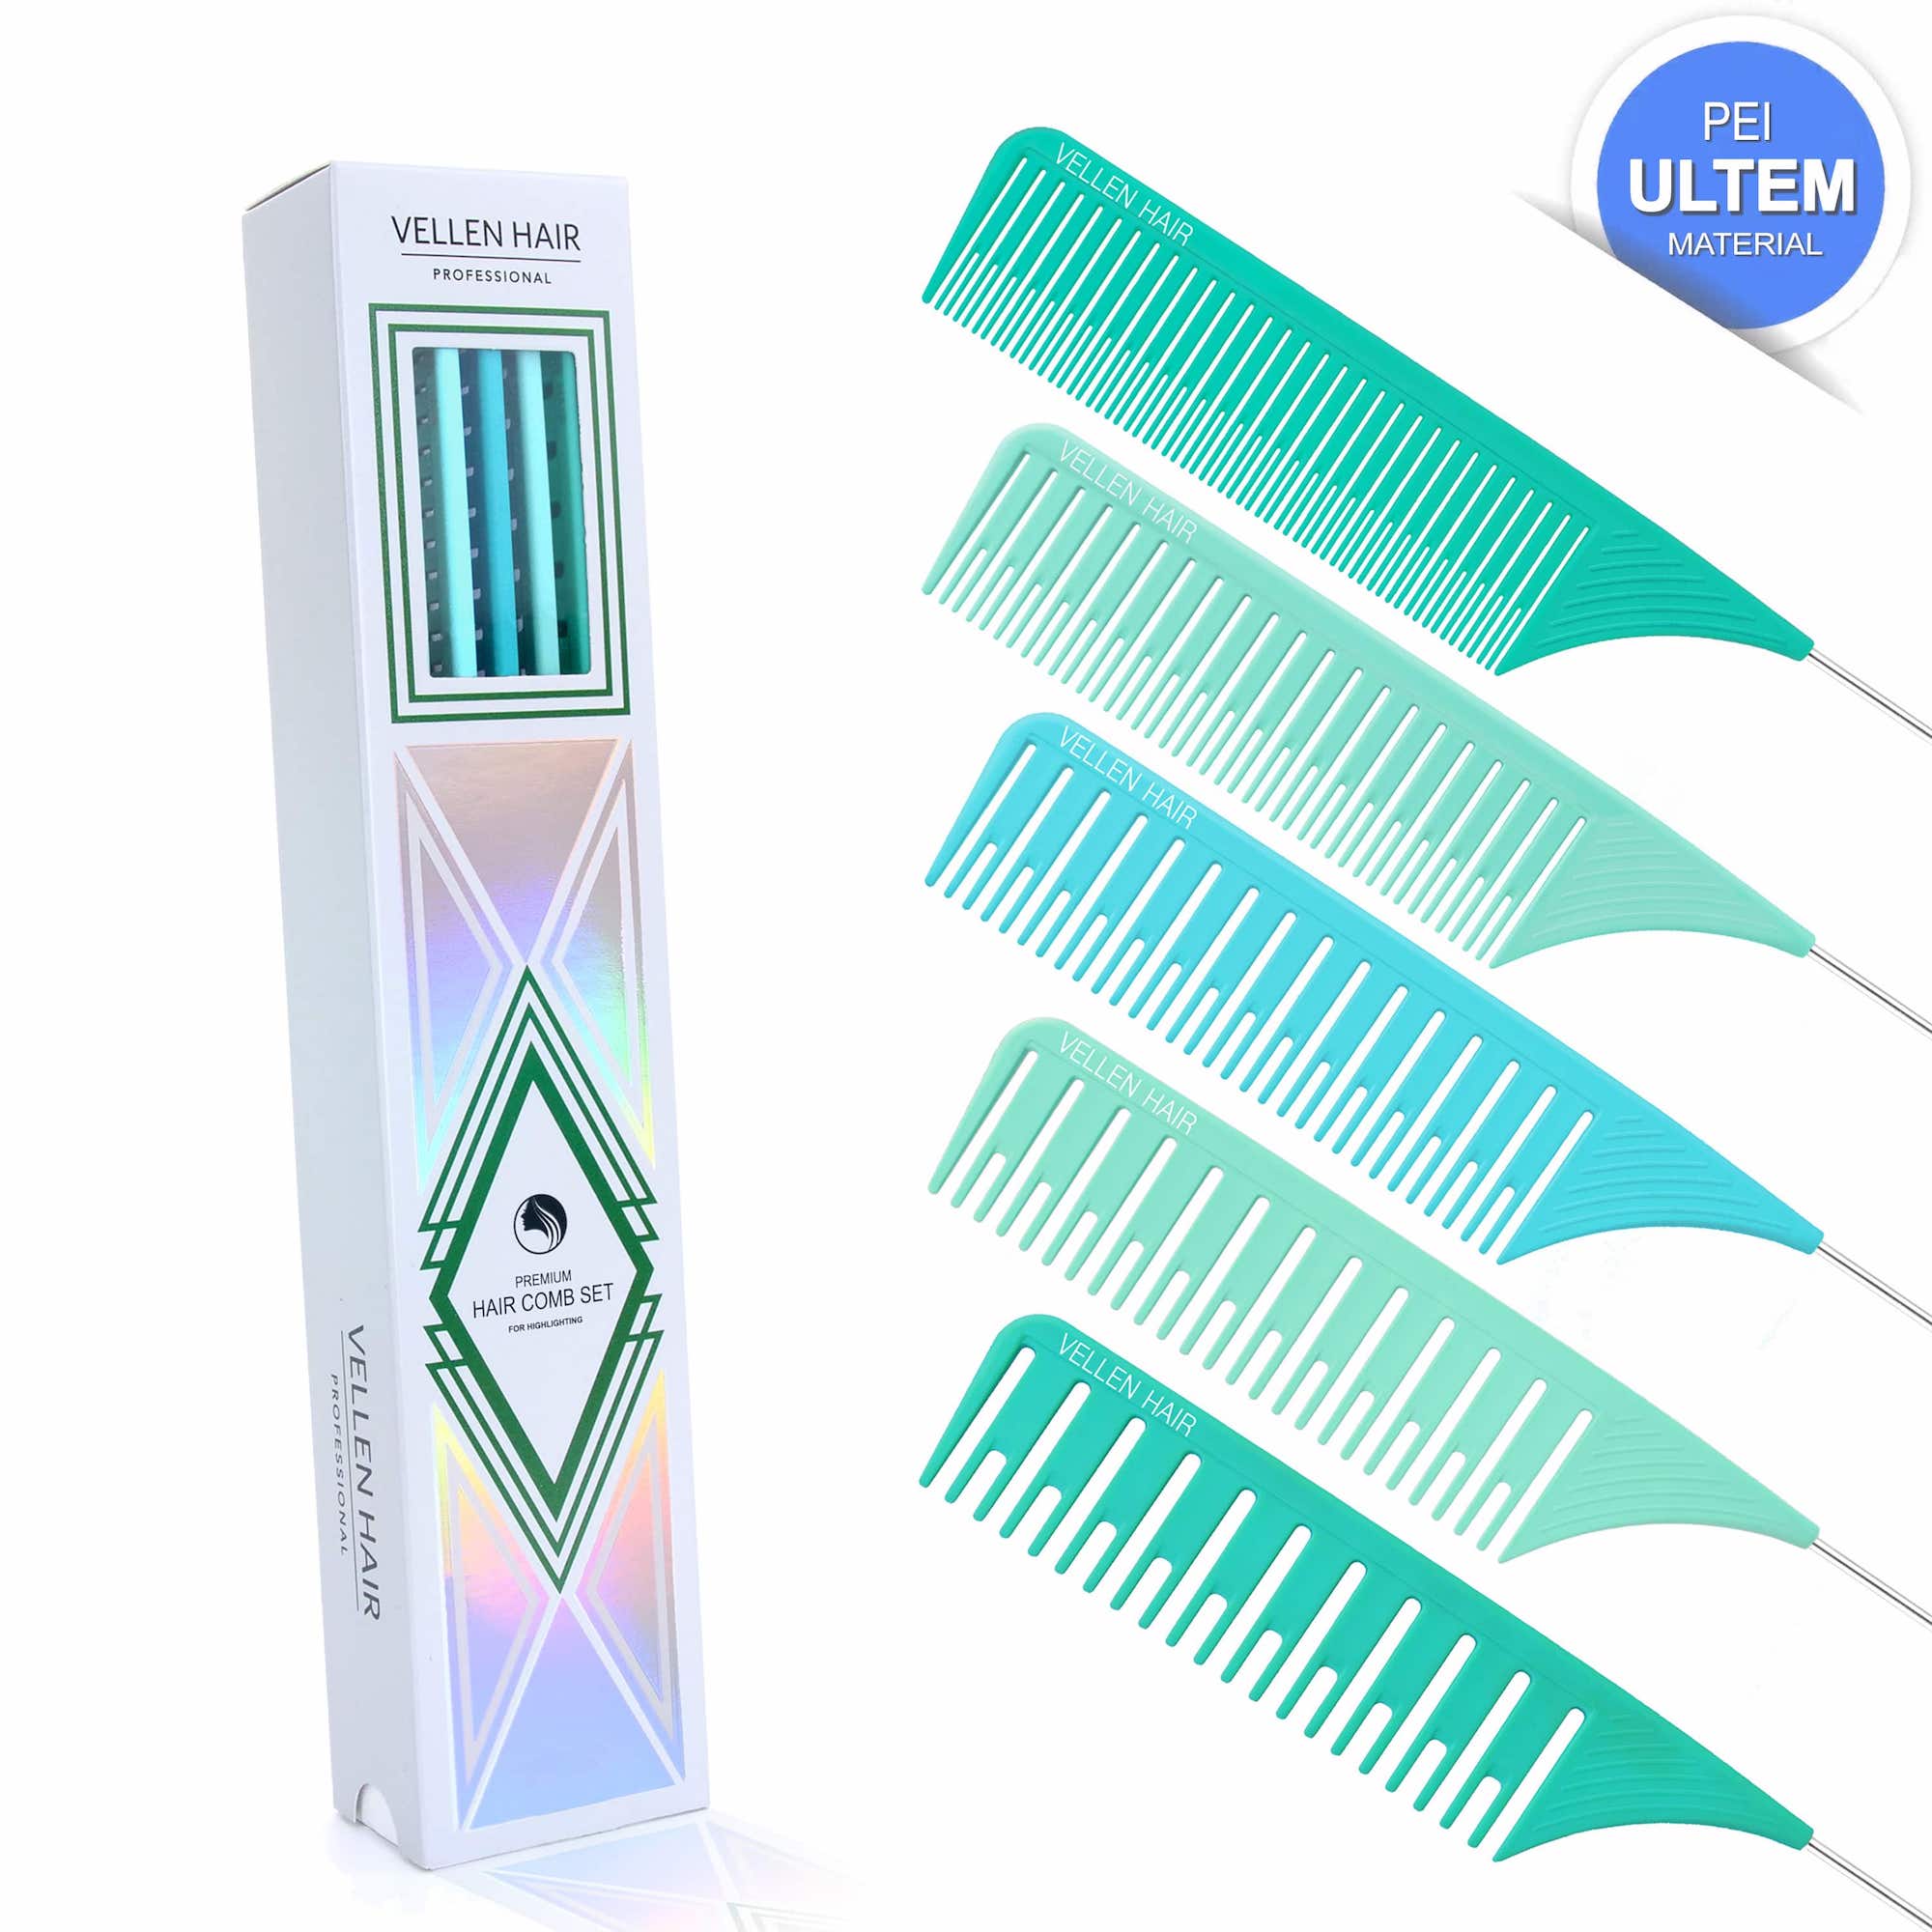 Ultimate Highlighting Comb Set 2.0 - 5 Sizes - Mutli-Color